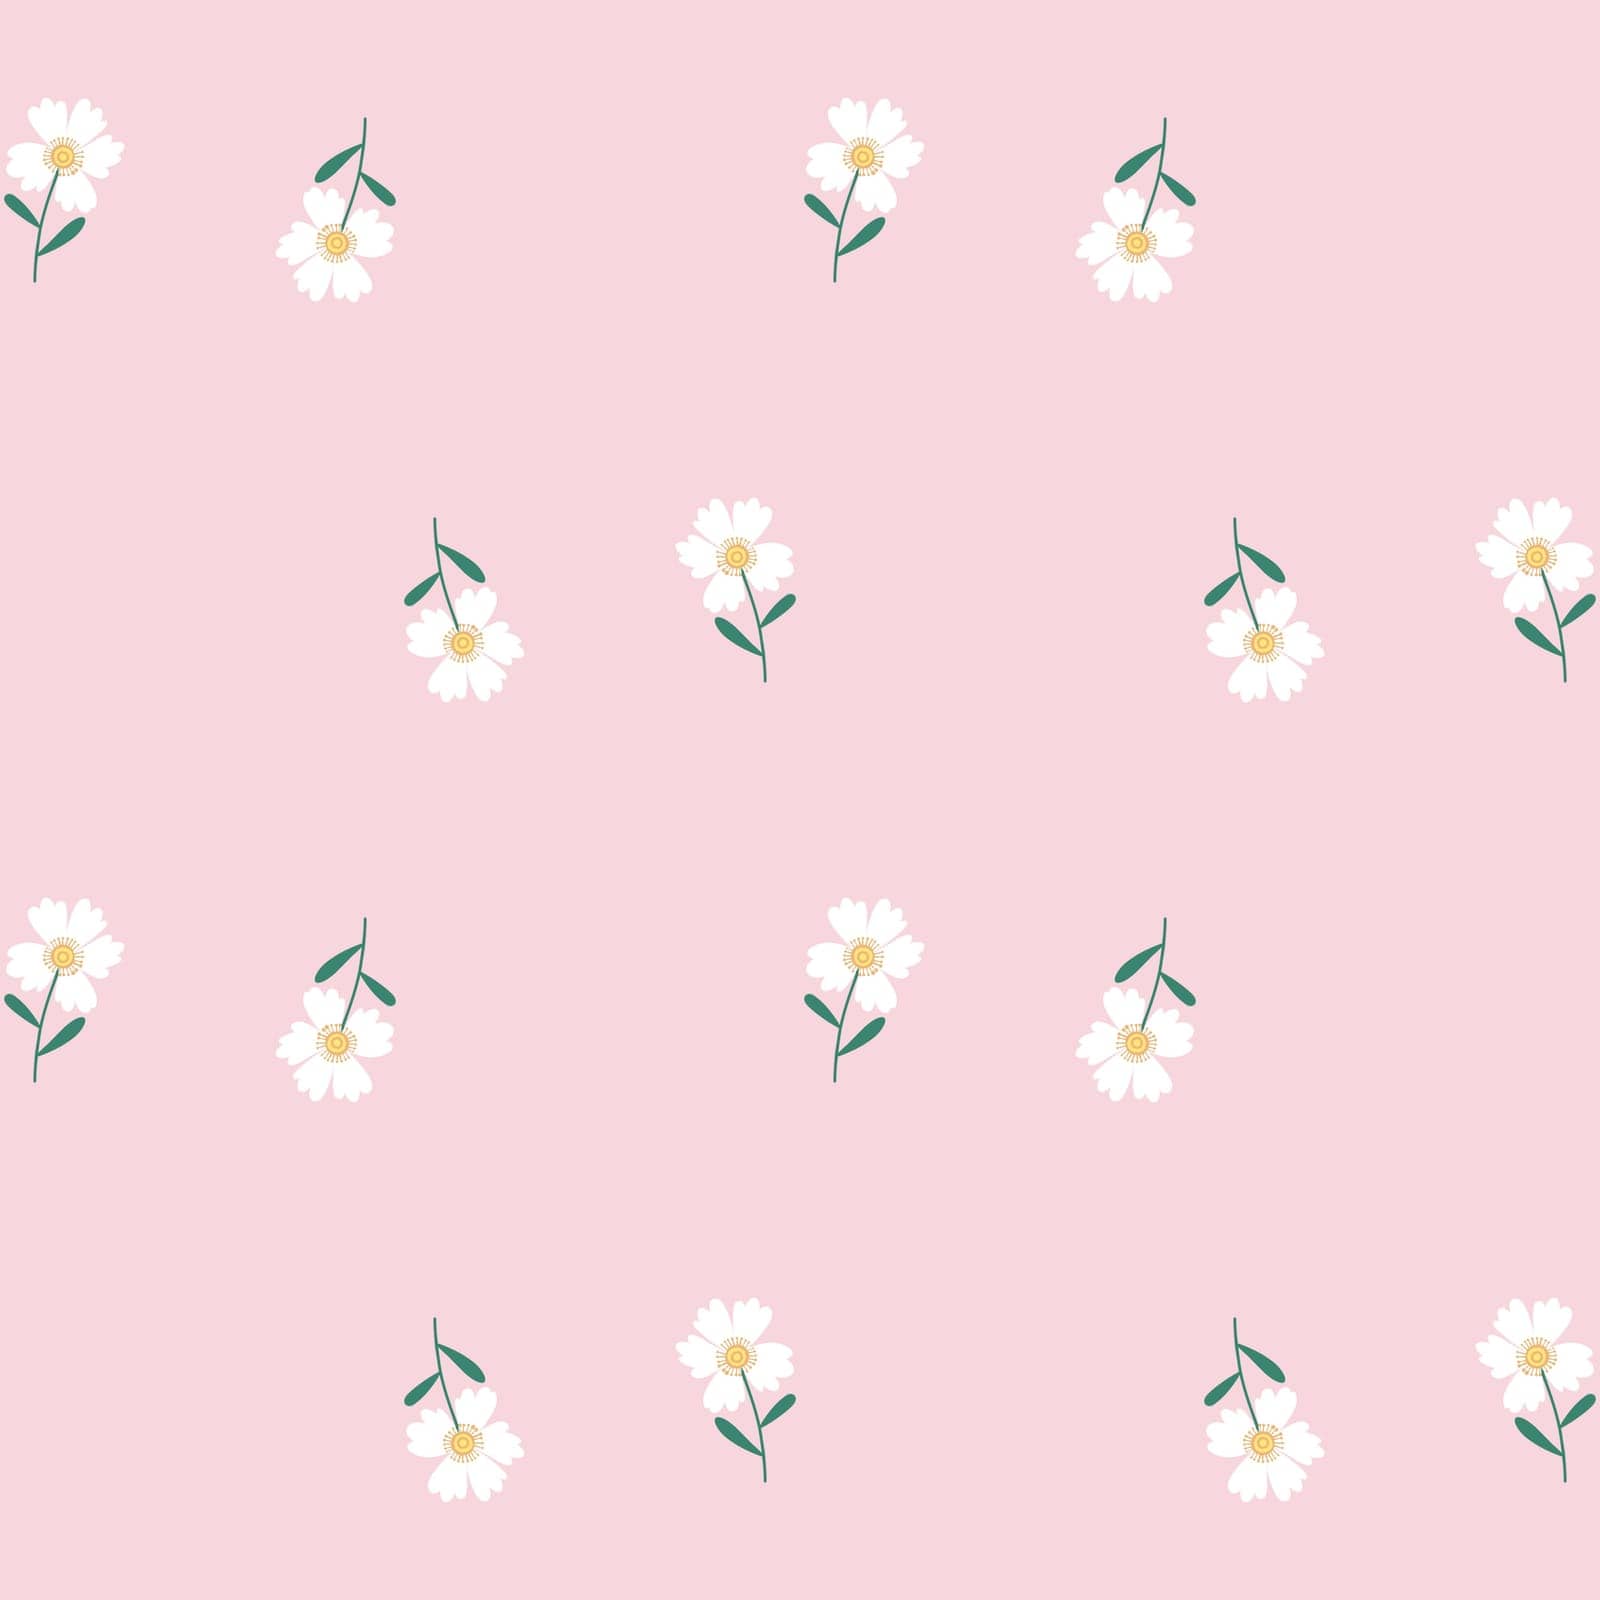 Floral Seamless Pattern of Sparse White Flowers on Pink Background by LanaLeta